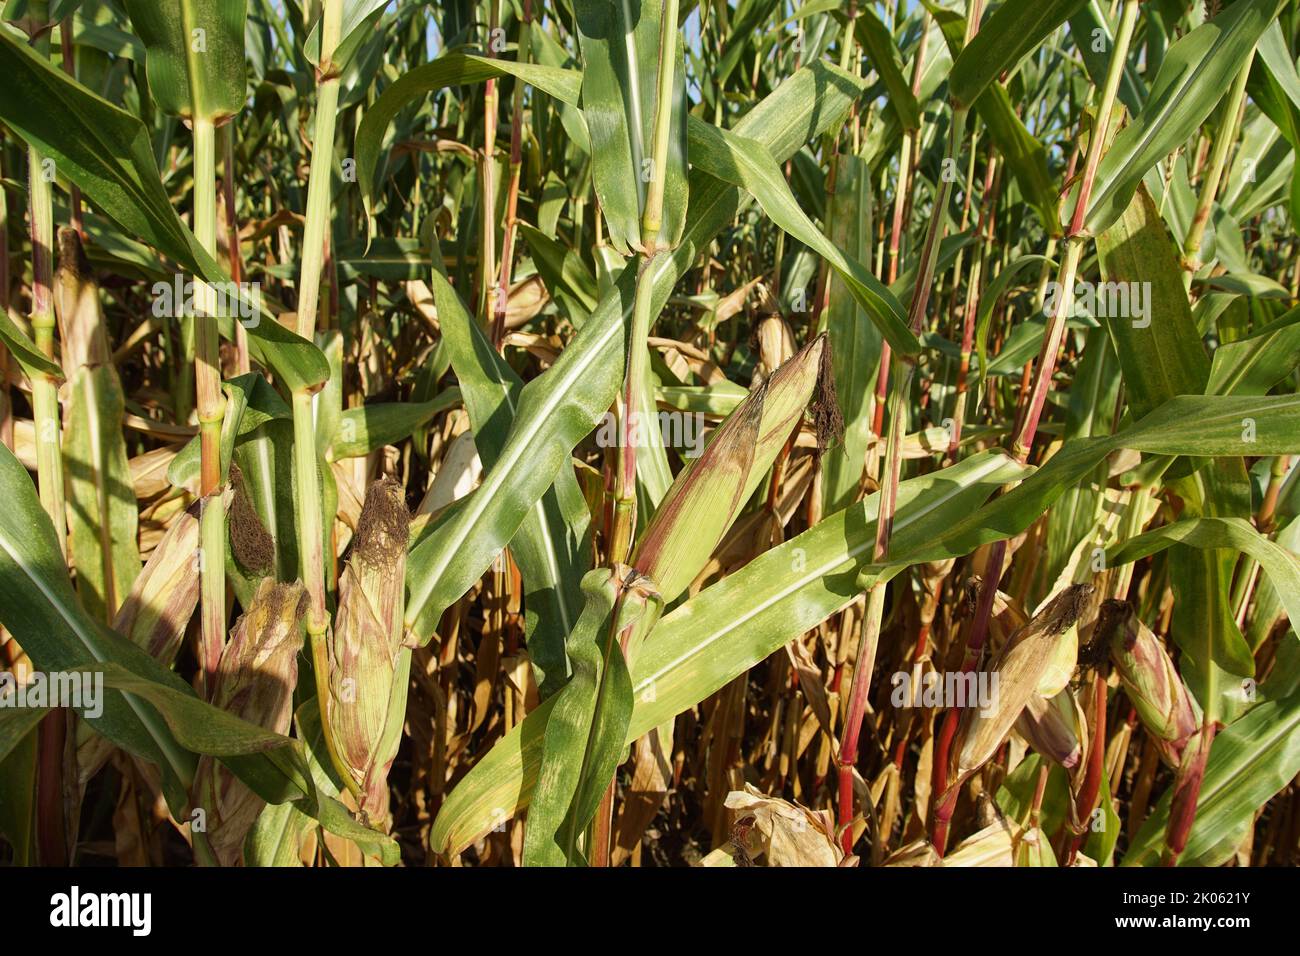 Closeup of a corn maize field. Plants with corn on the cob. Summer, August in southern Germany. Stock Photo